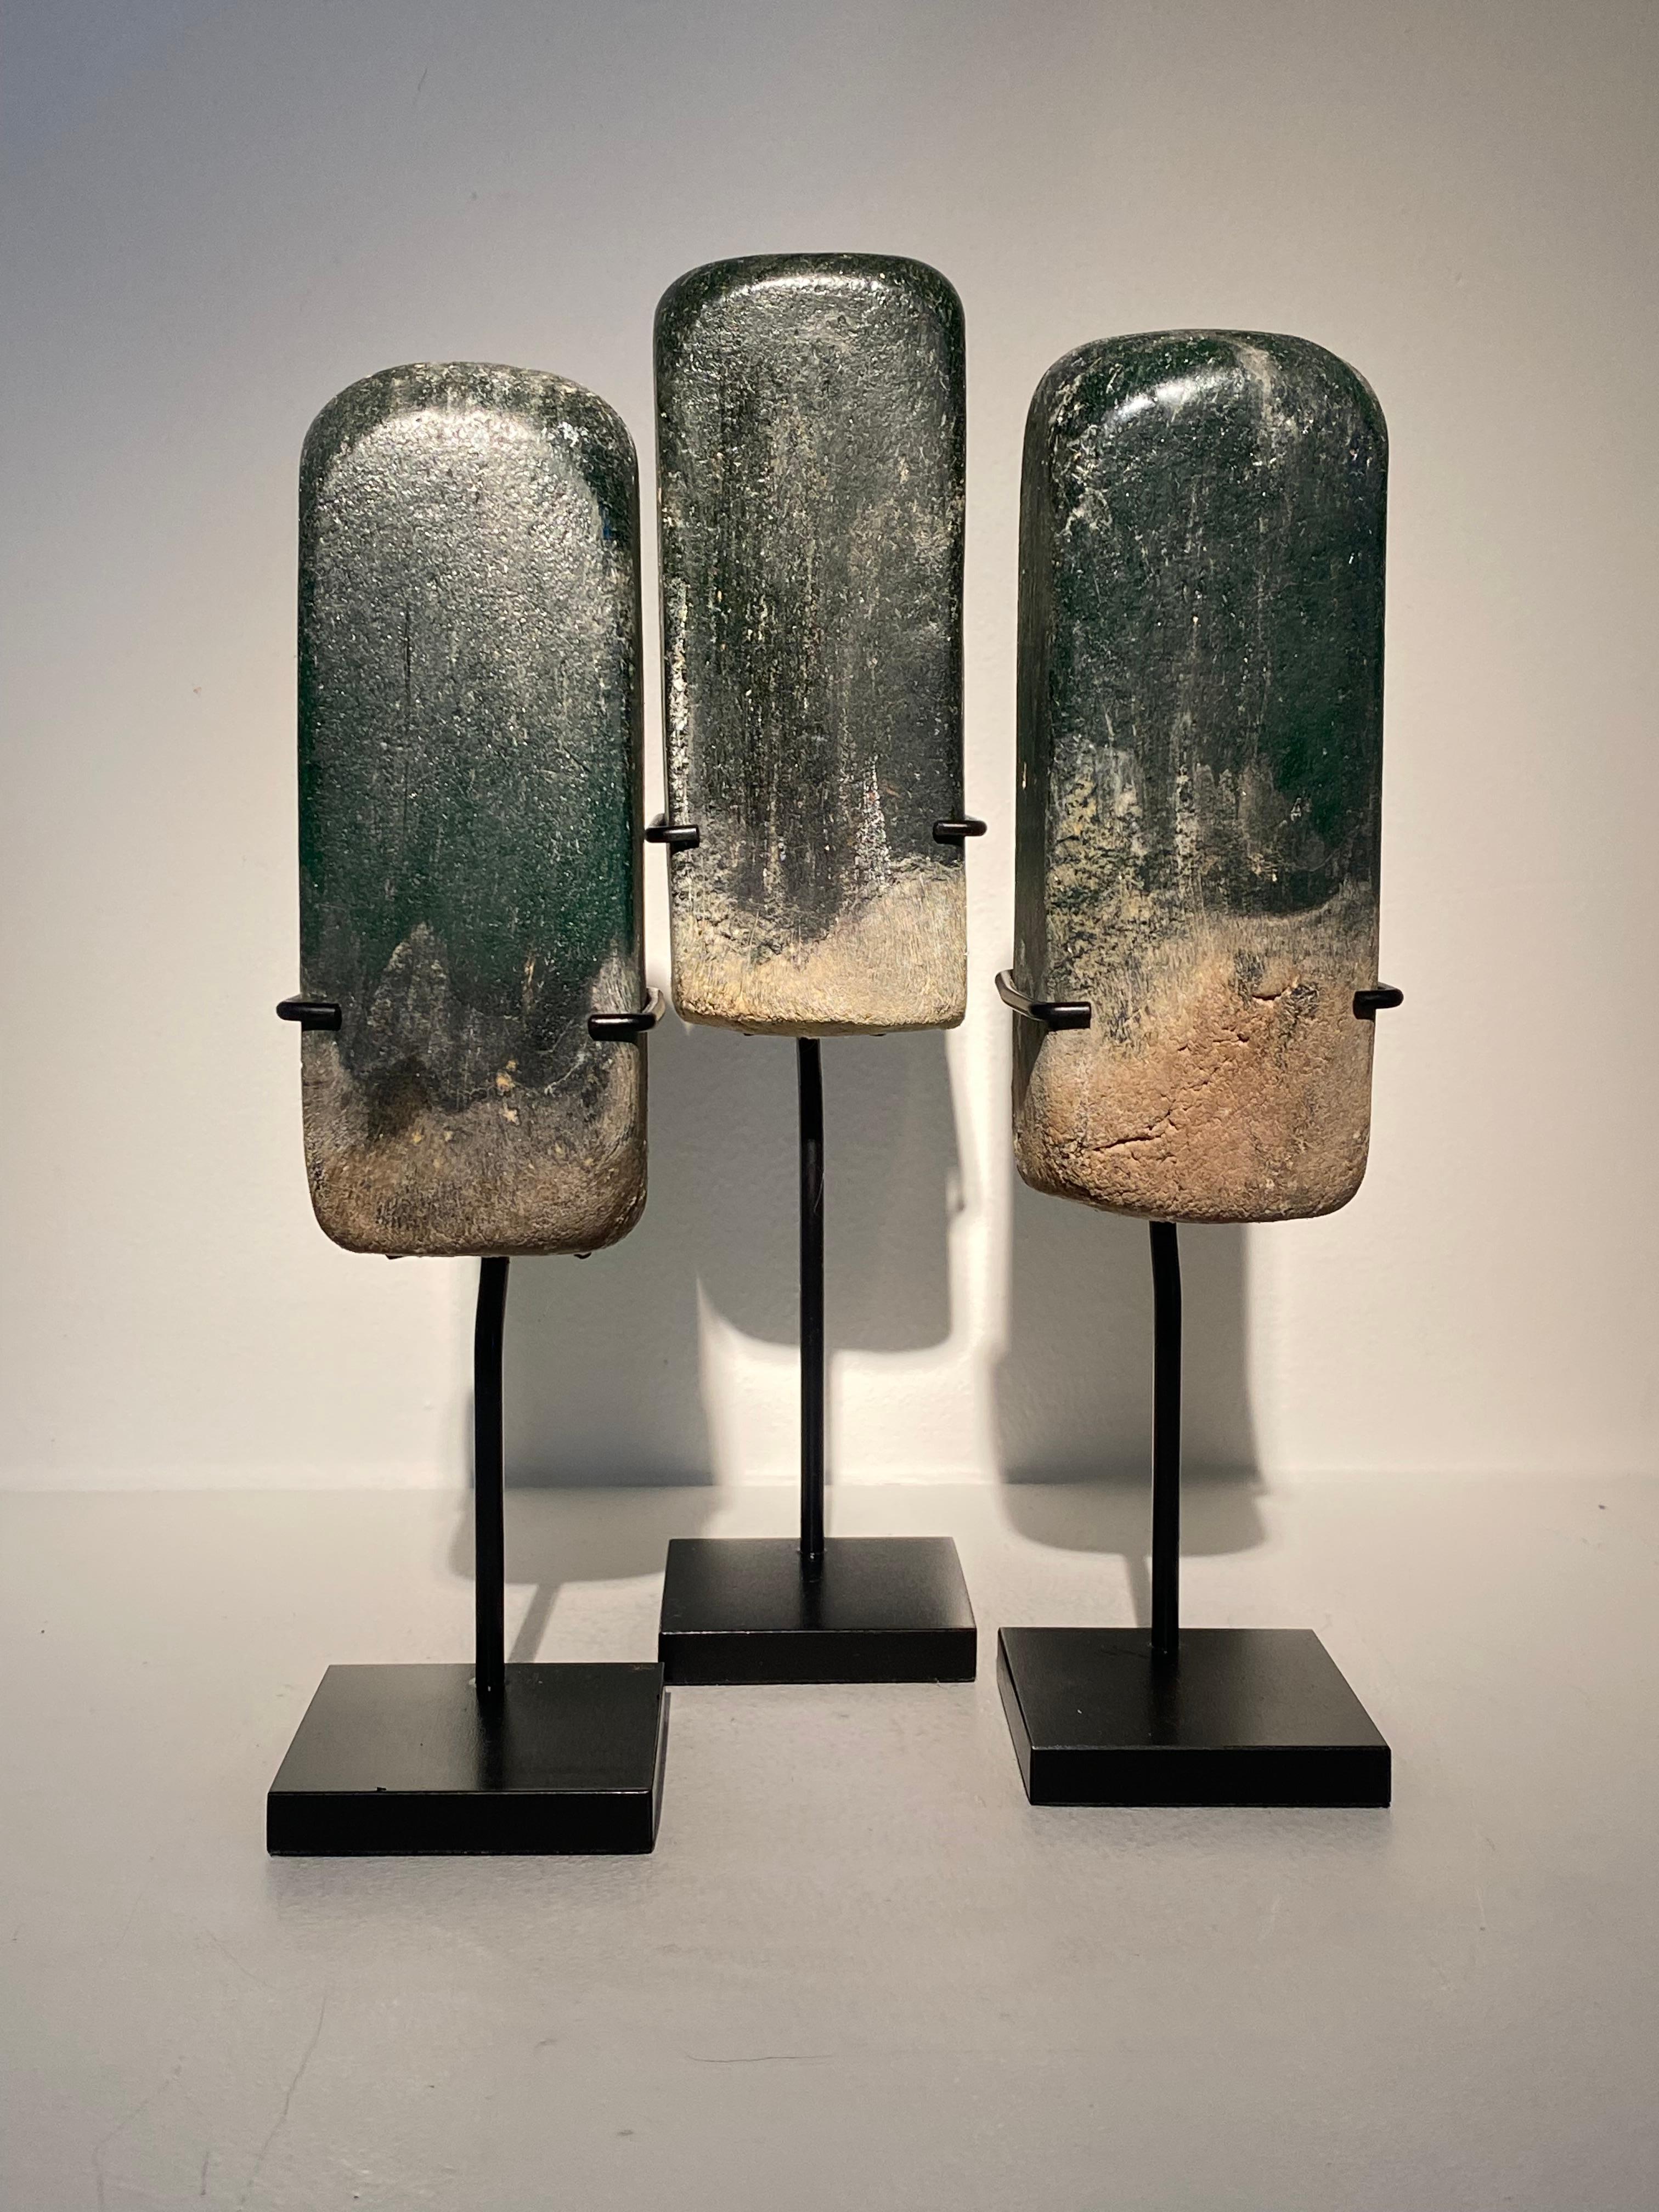 Exceptional set of 3 rectangular objects made out of Glass,
from the Thailand region in South-East-Asia,
these objects made out of Green Glass were used in the handmade production of Jewelry,very decorative items,
mounted on a metal stand in